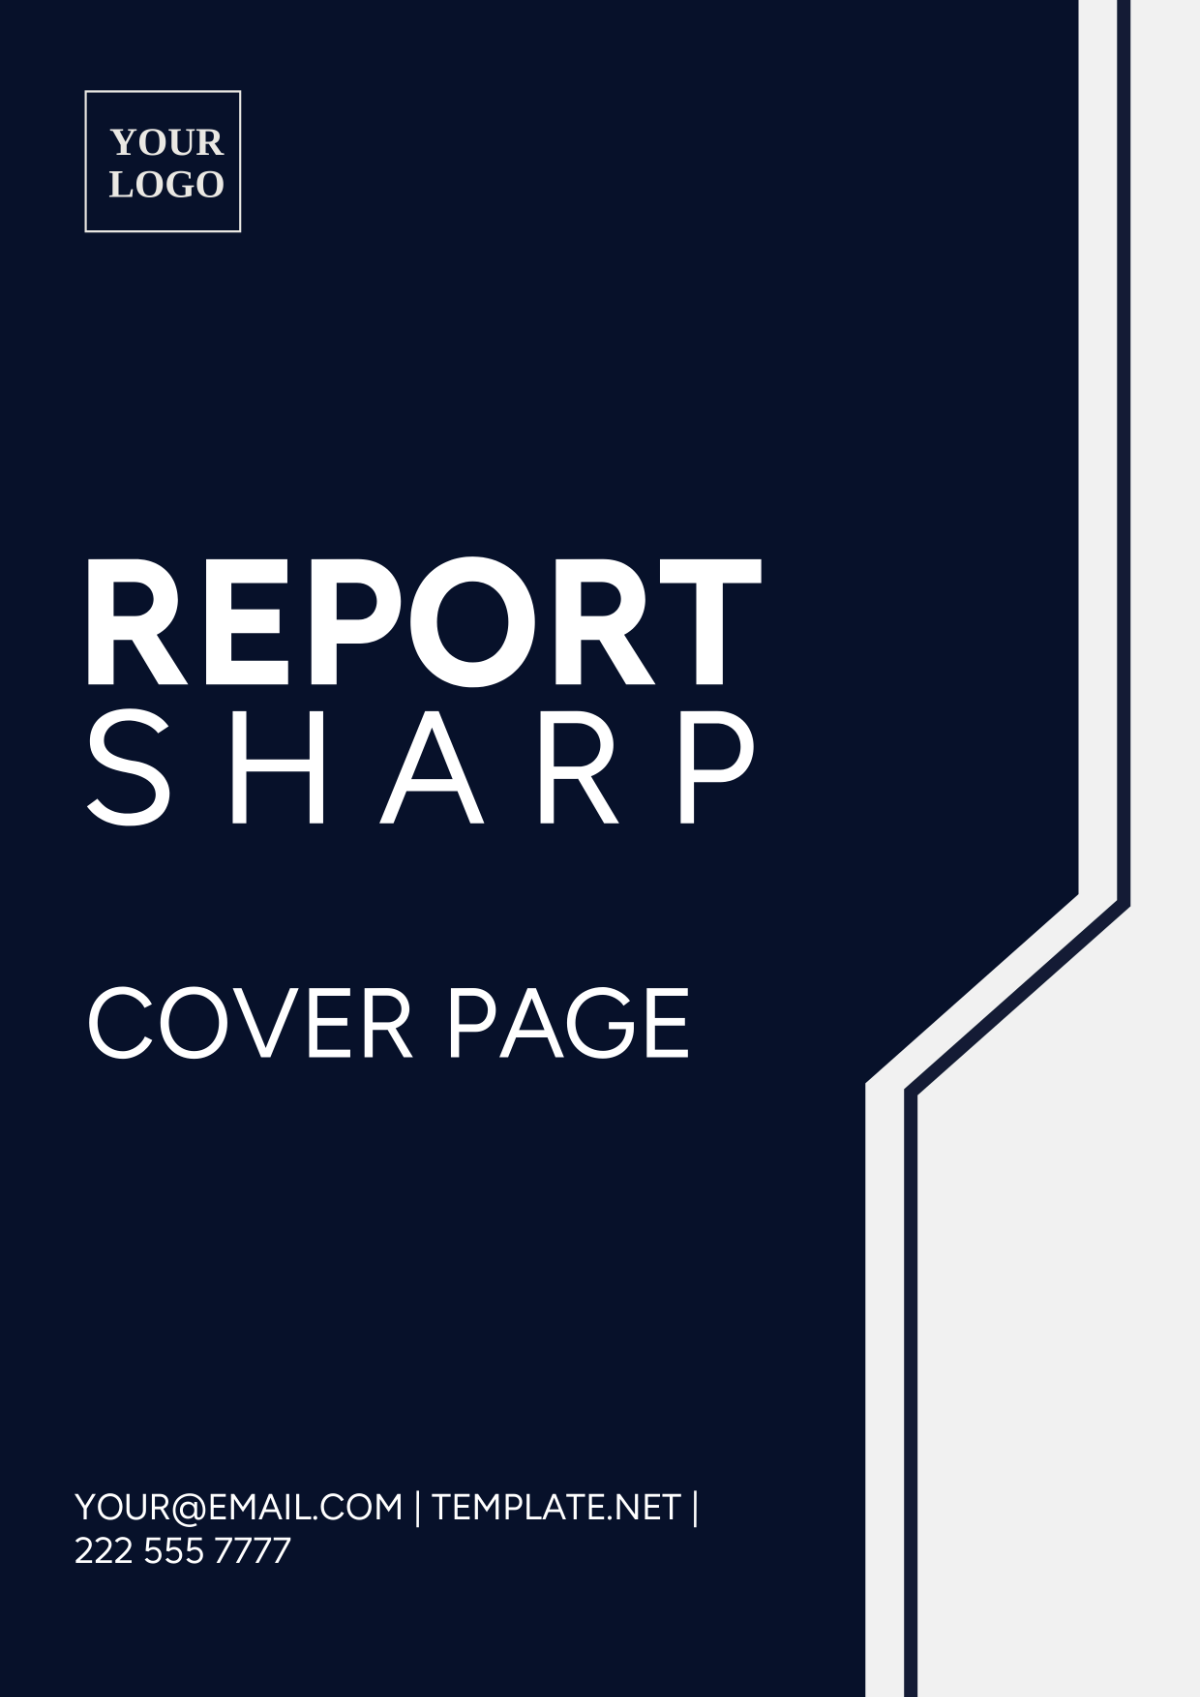 Report Sharp Cover Page Template